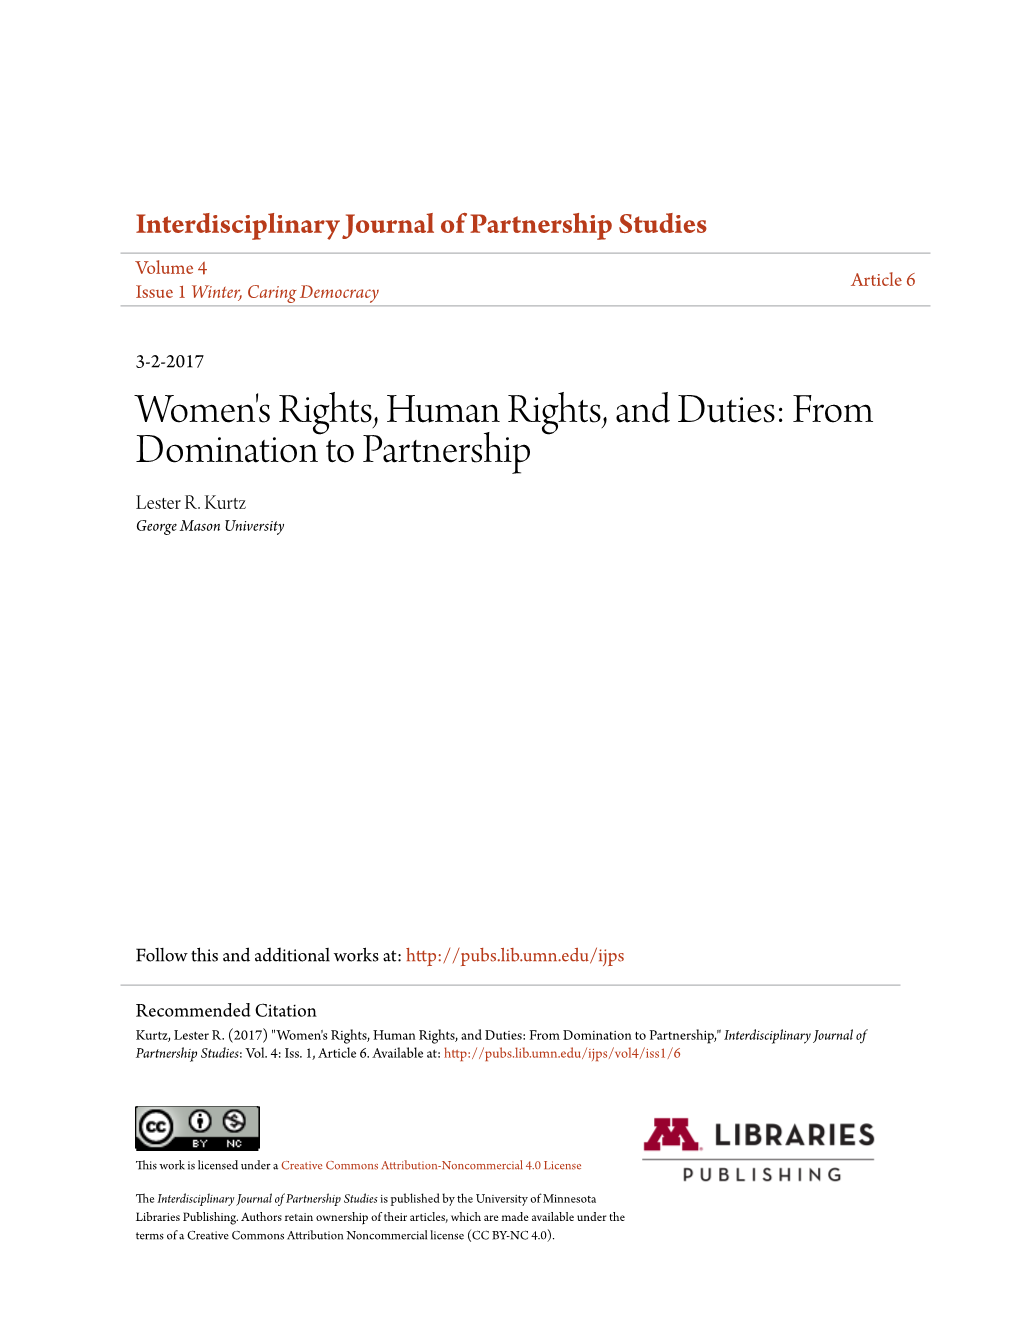 Women's Rights, Human Rights, and Duties: from Domination to Partnership Lester R